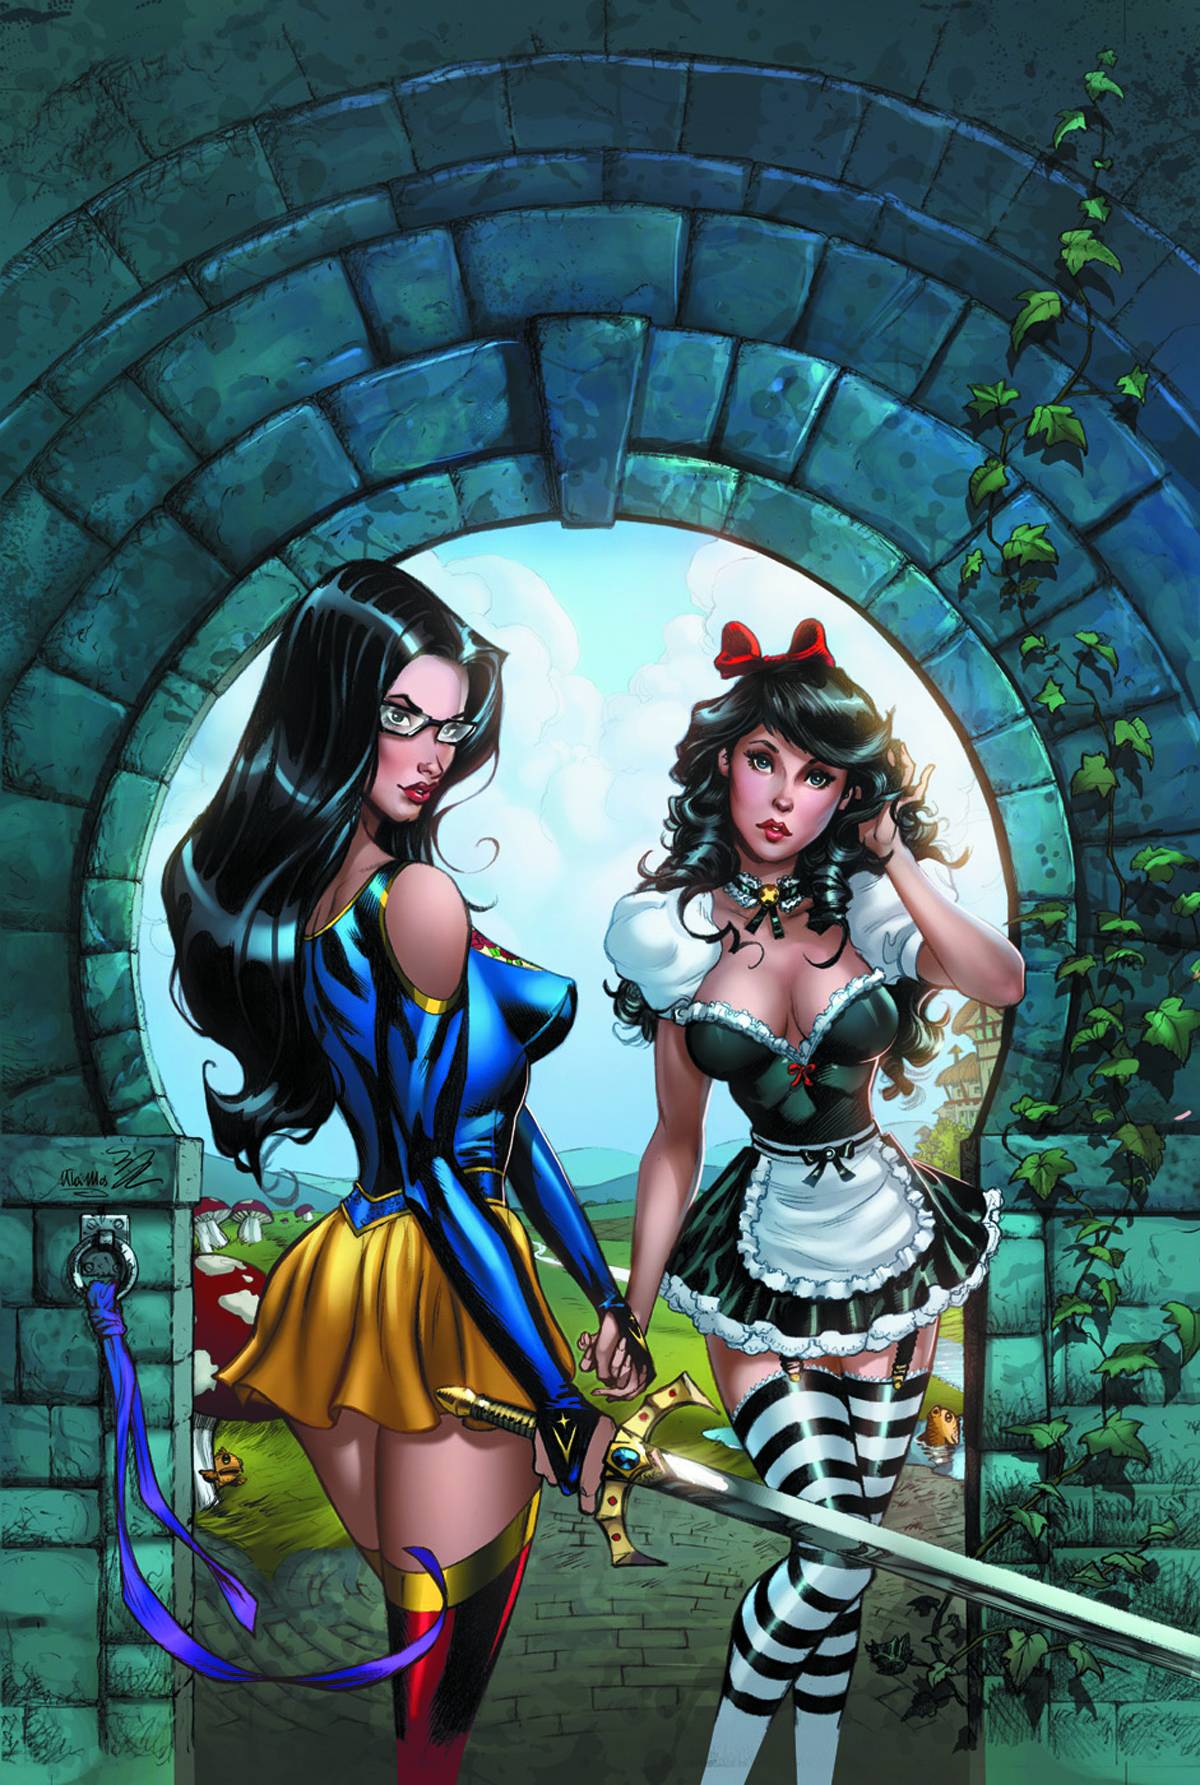 Cover A Wonderland 3 Grimm Fairy Tales vs